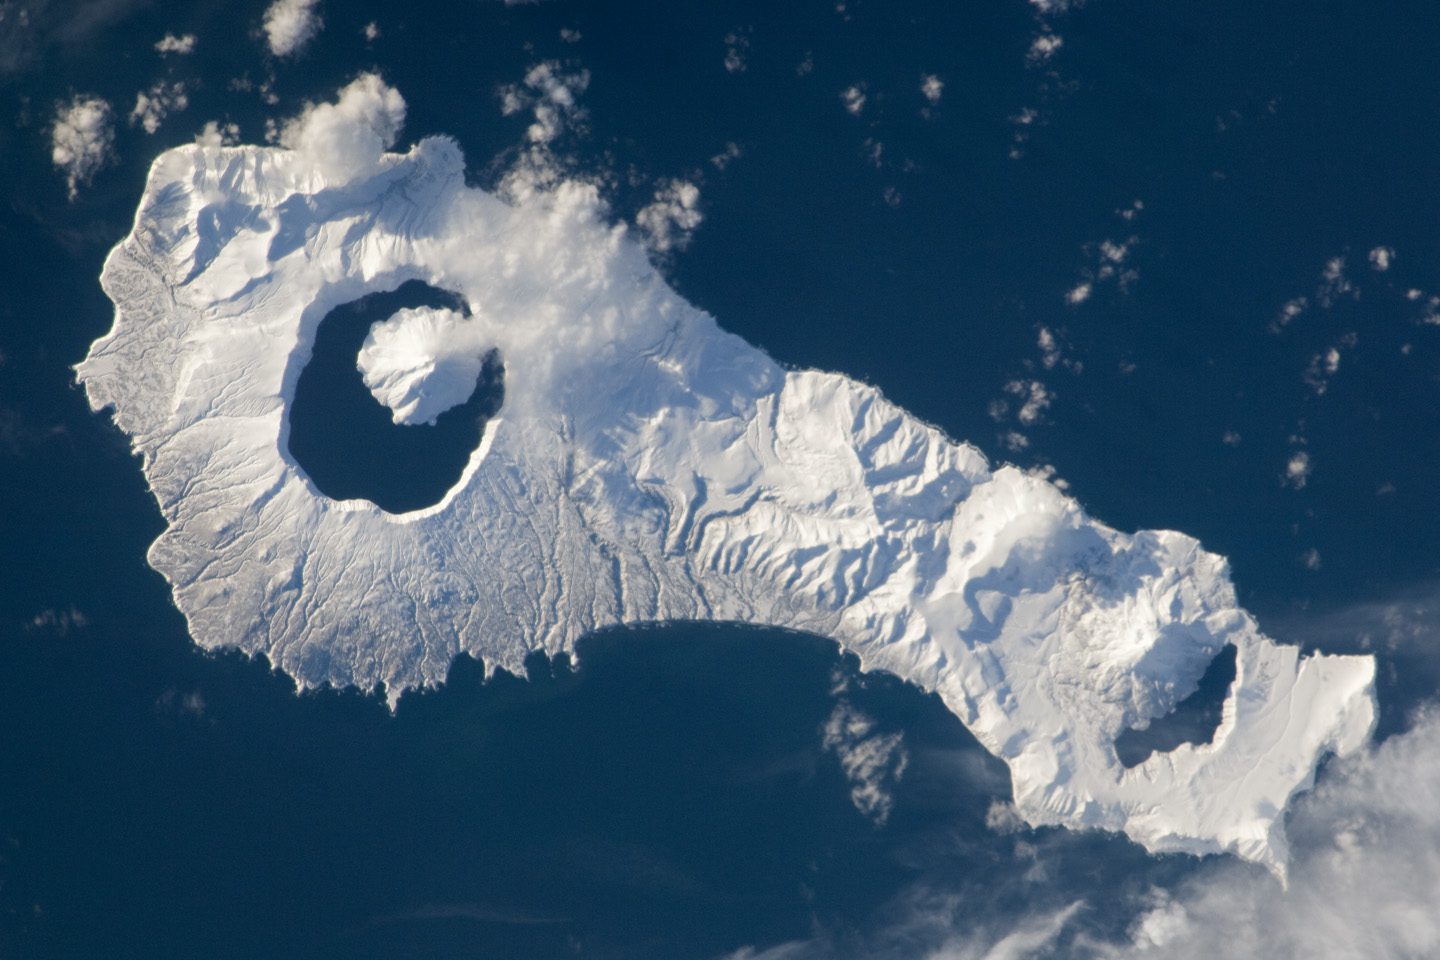 Snow cover highlights the calderas and volcanic cones that form the northern and southern ends of Onekotan Island, part of the Russian Federation in the western Pacific Ocean.